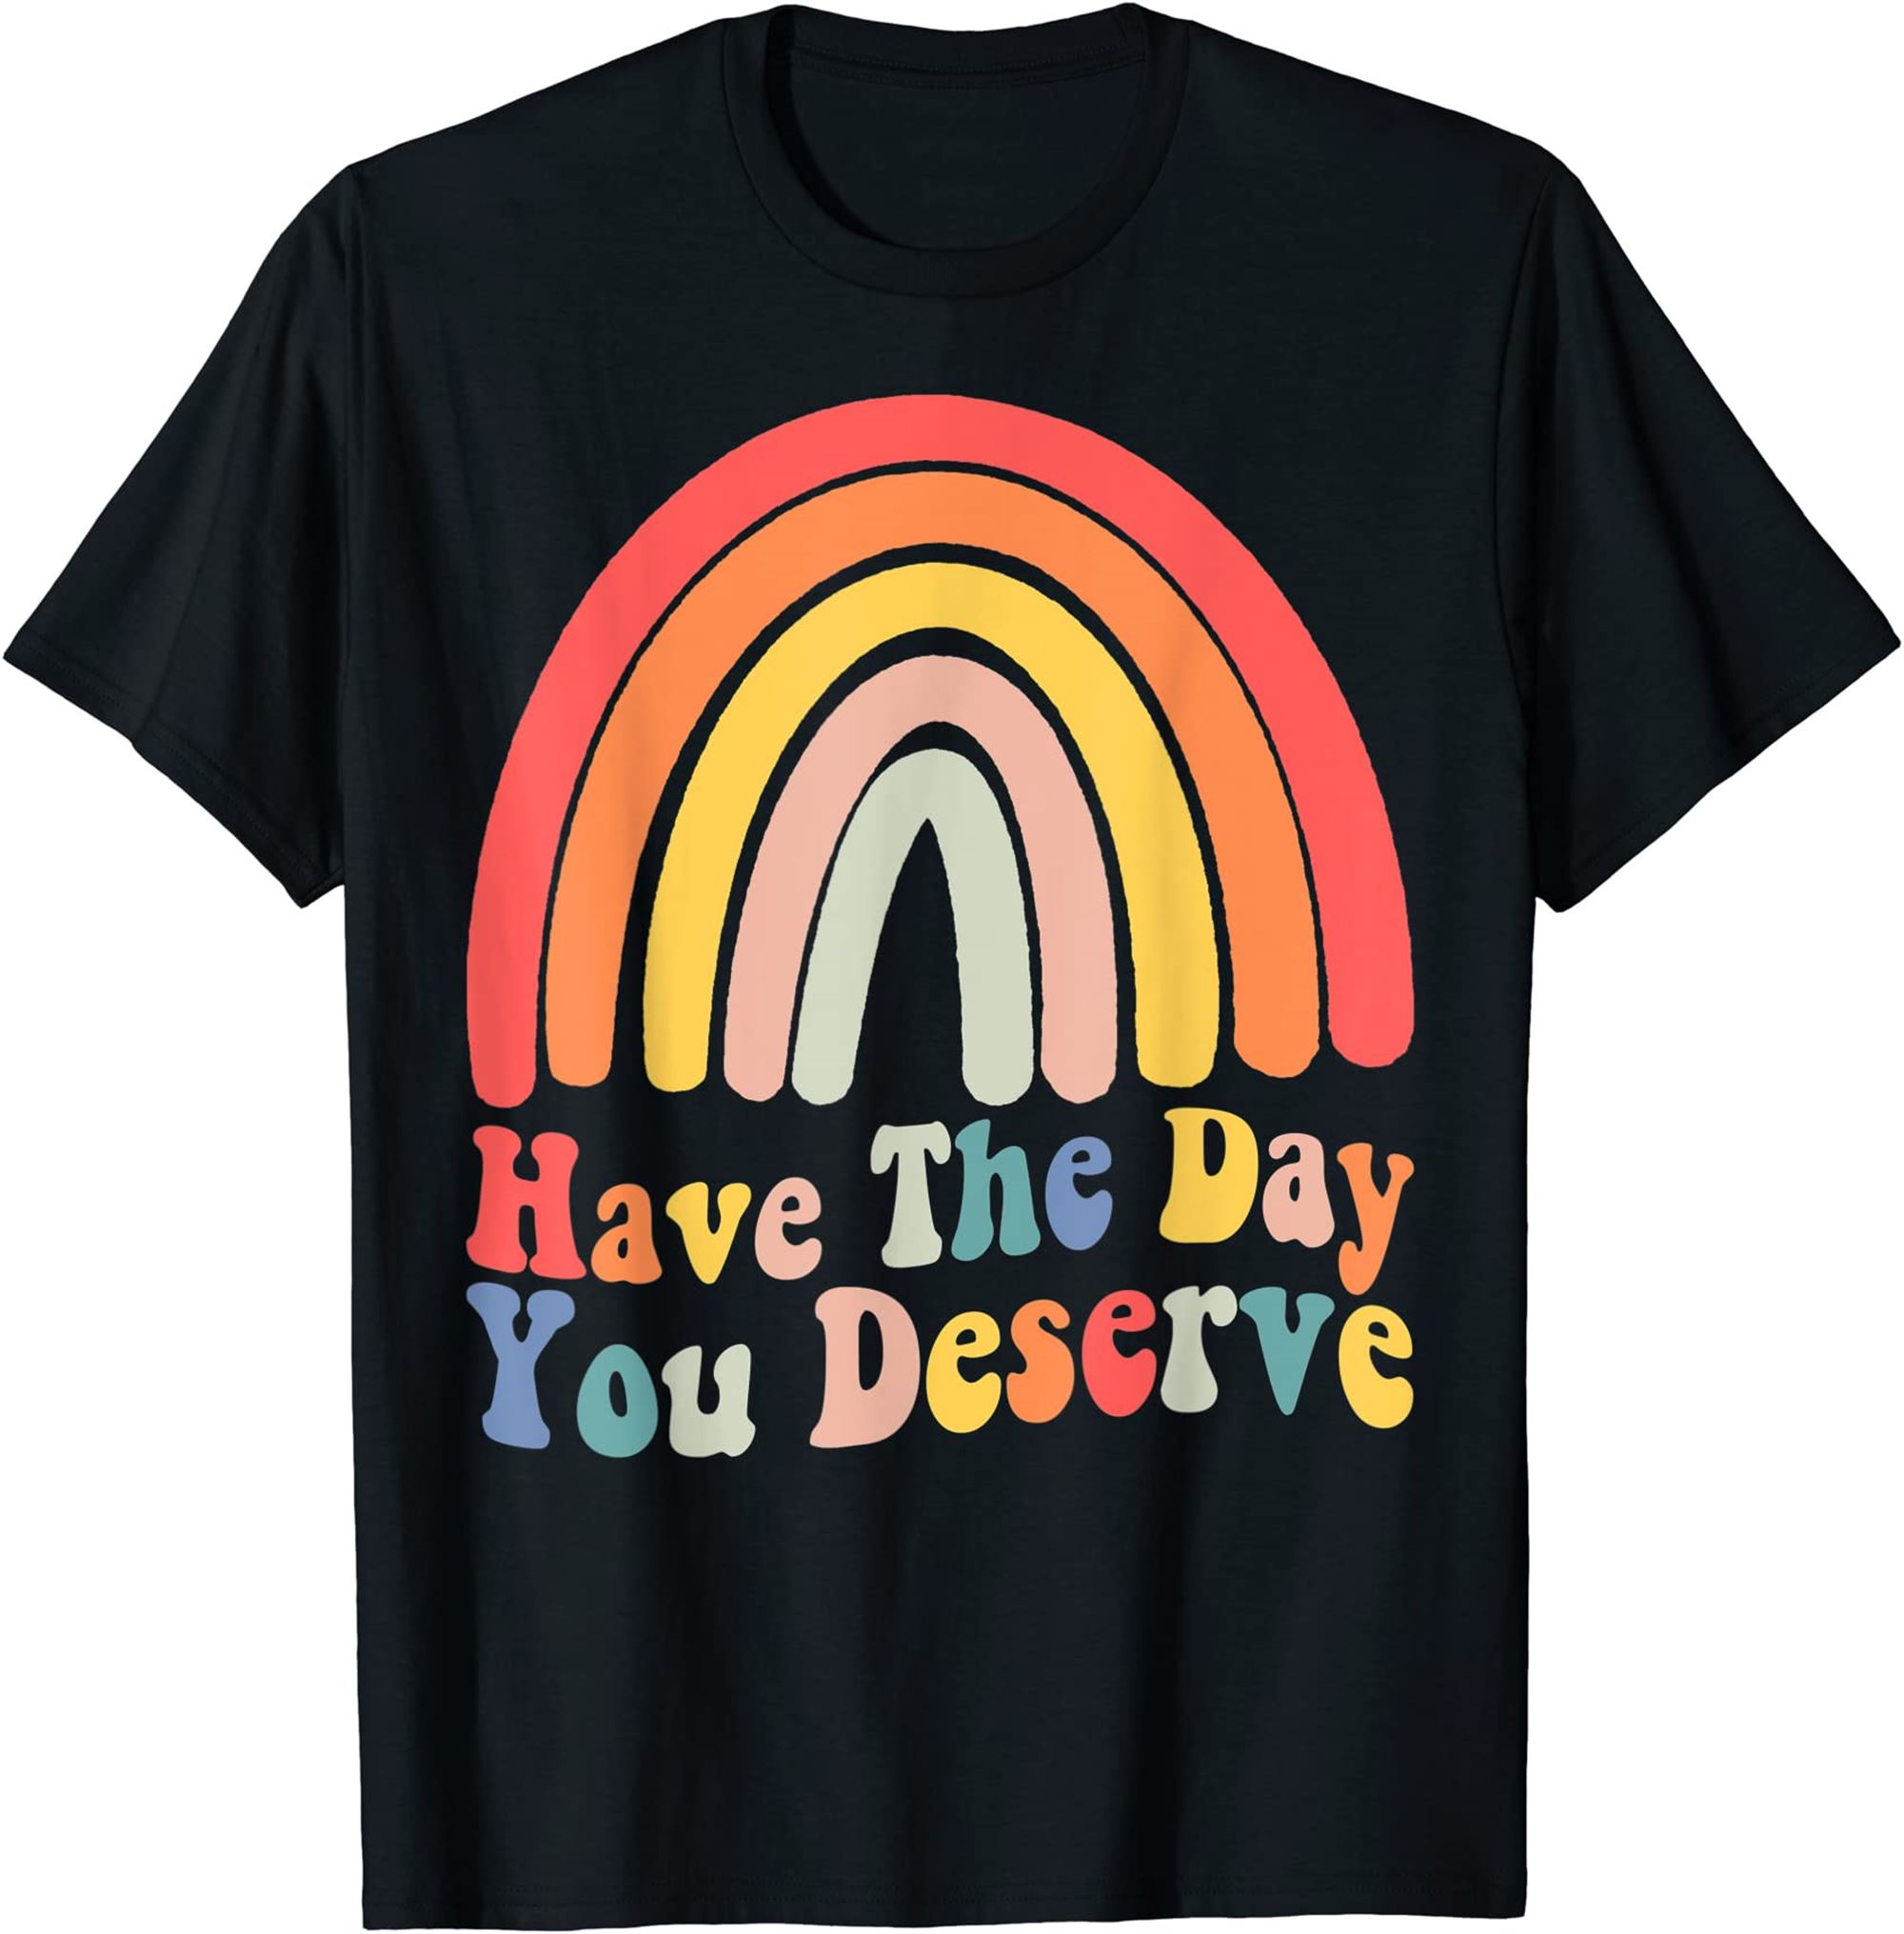 Have The Day You Deserve Saying Cool Motivational Quote T-shirt Full Size Up To 5xl